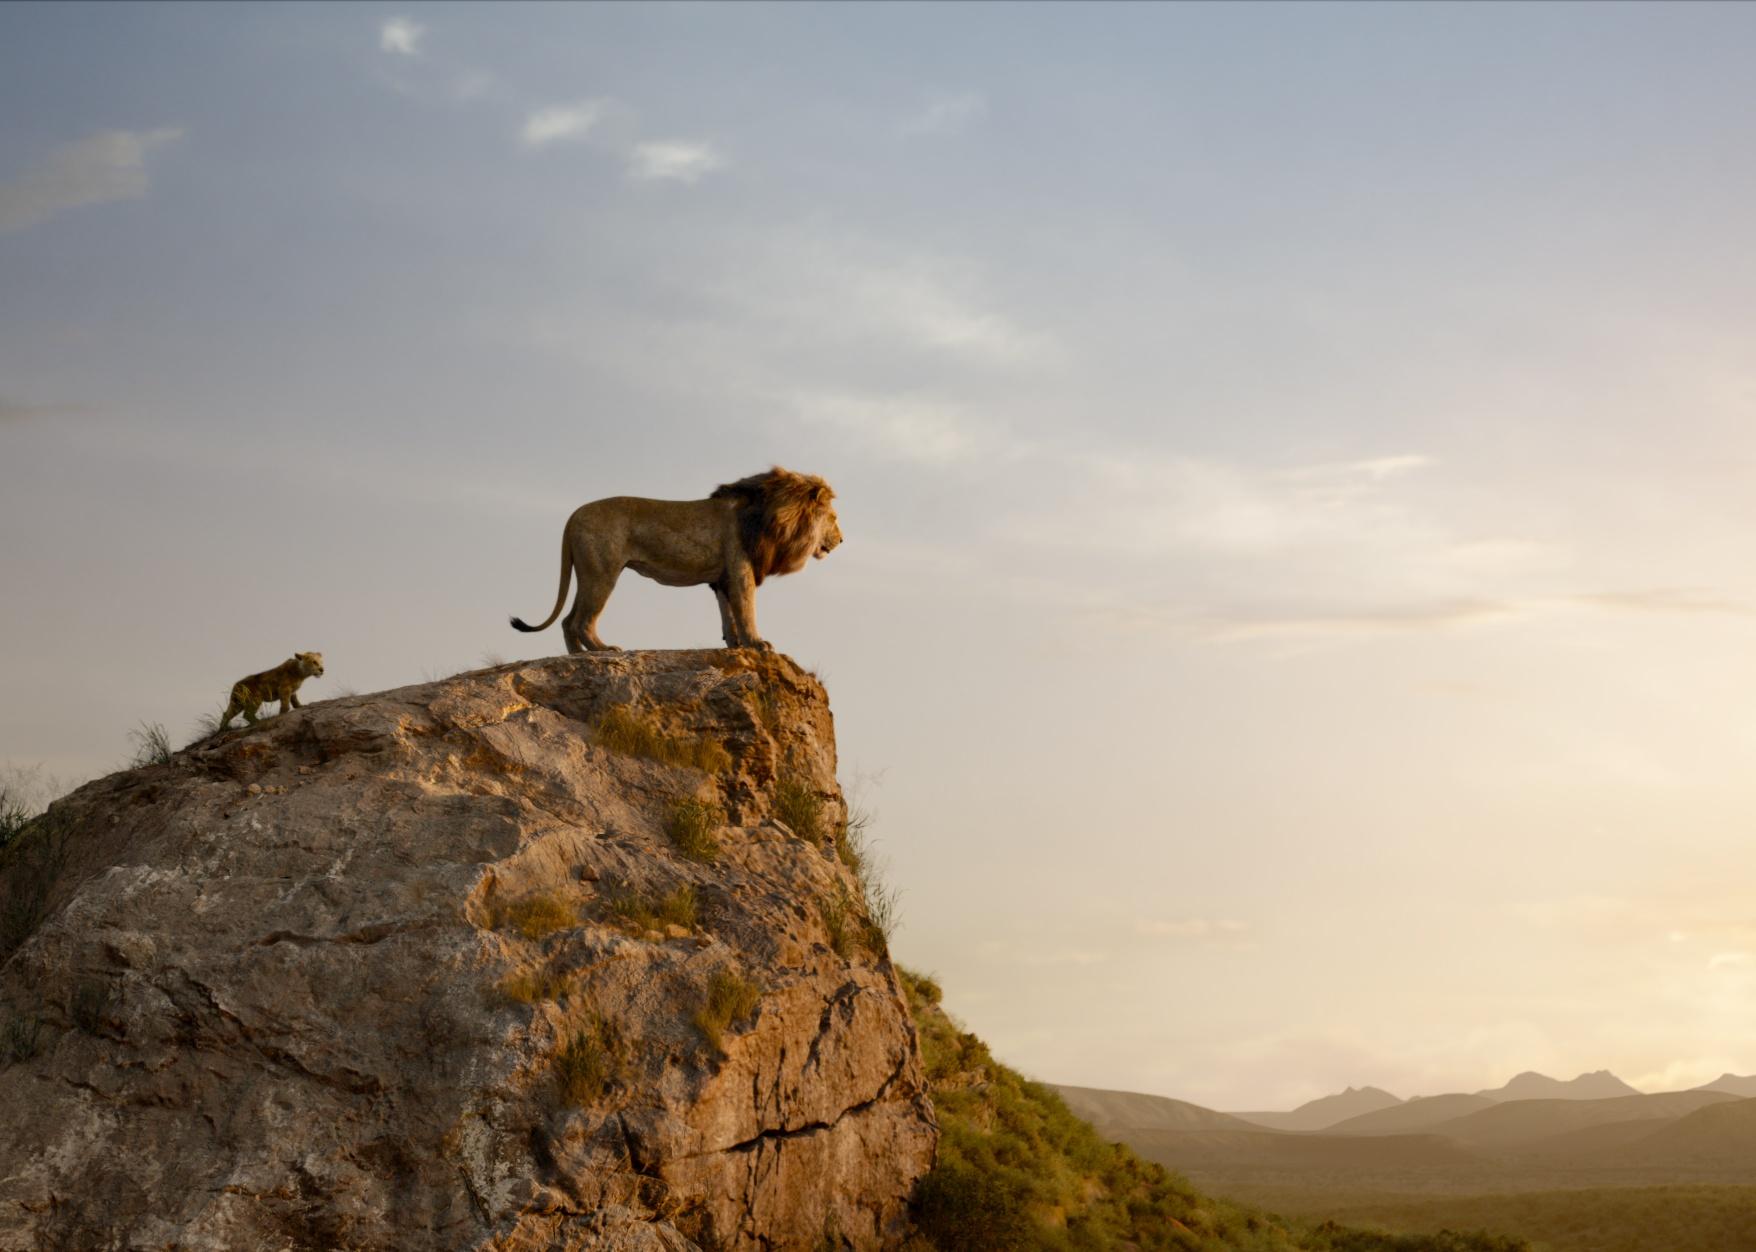 A lion cub following a grown lion who is sitting on a cliff overlooking the valley.